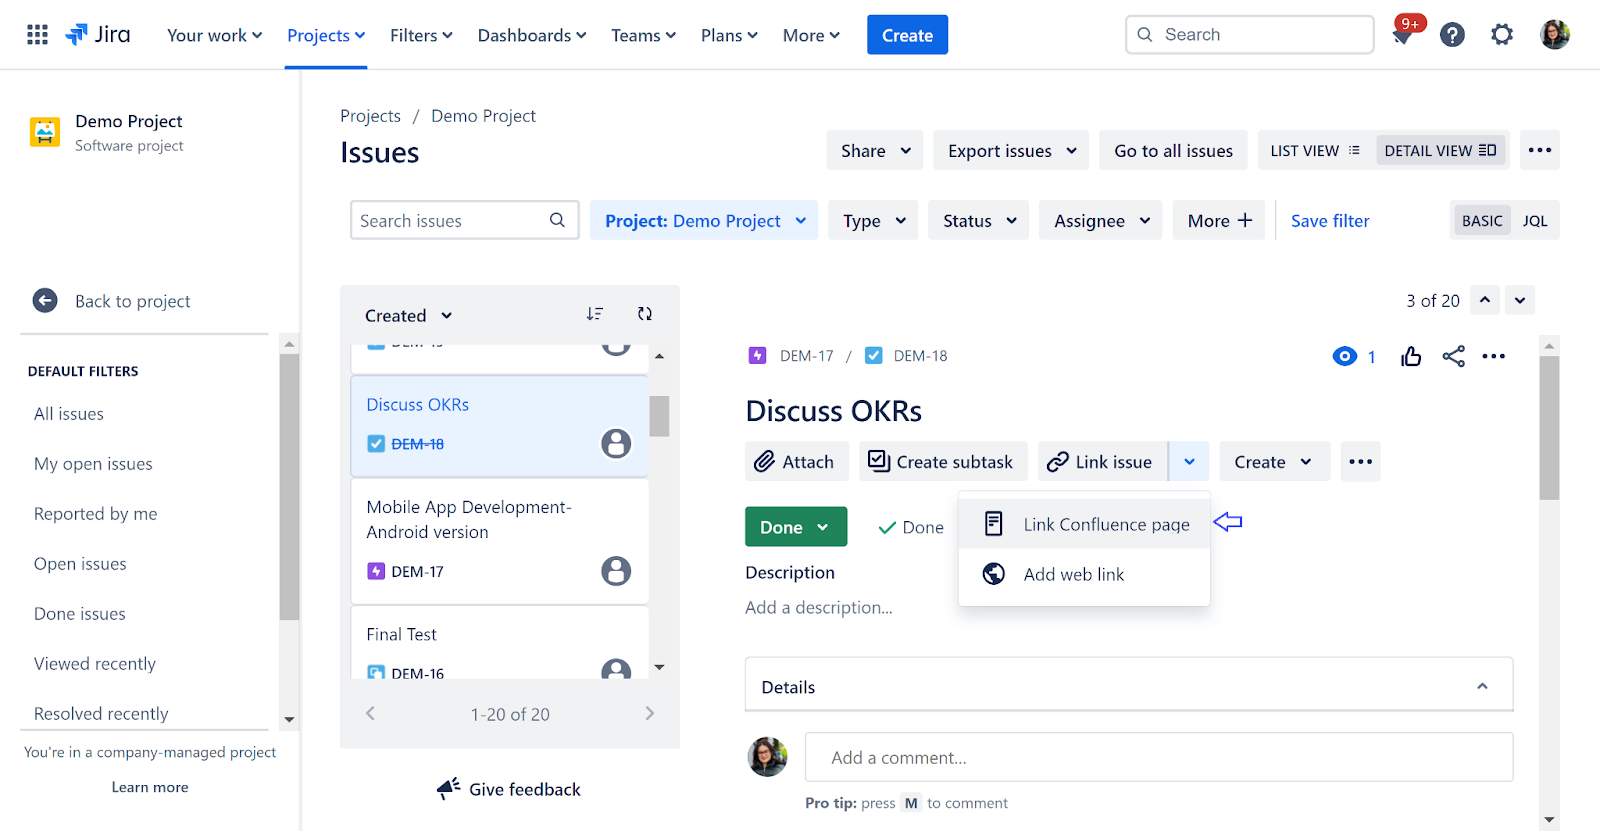 Link Confluence page to jira issue